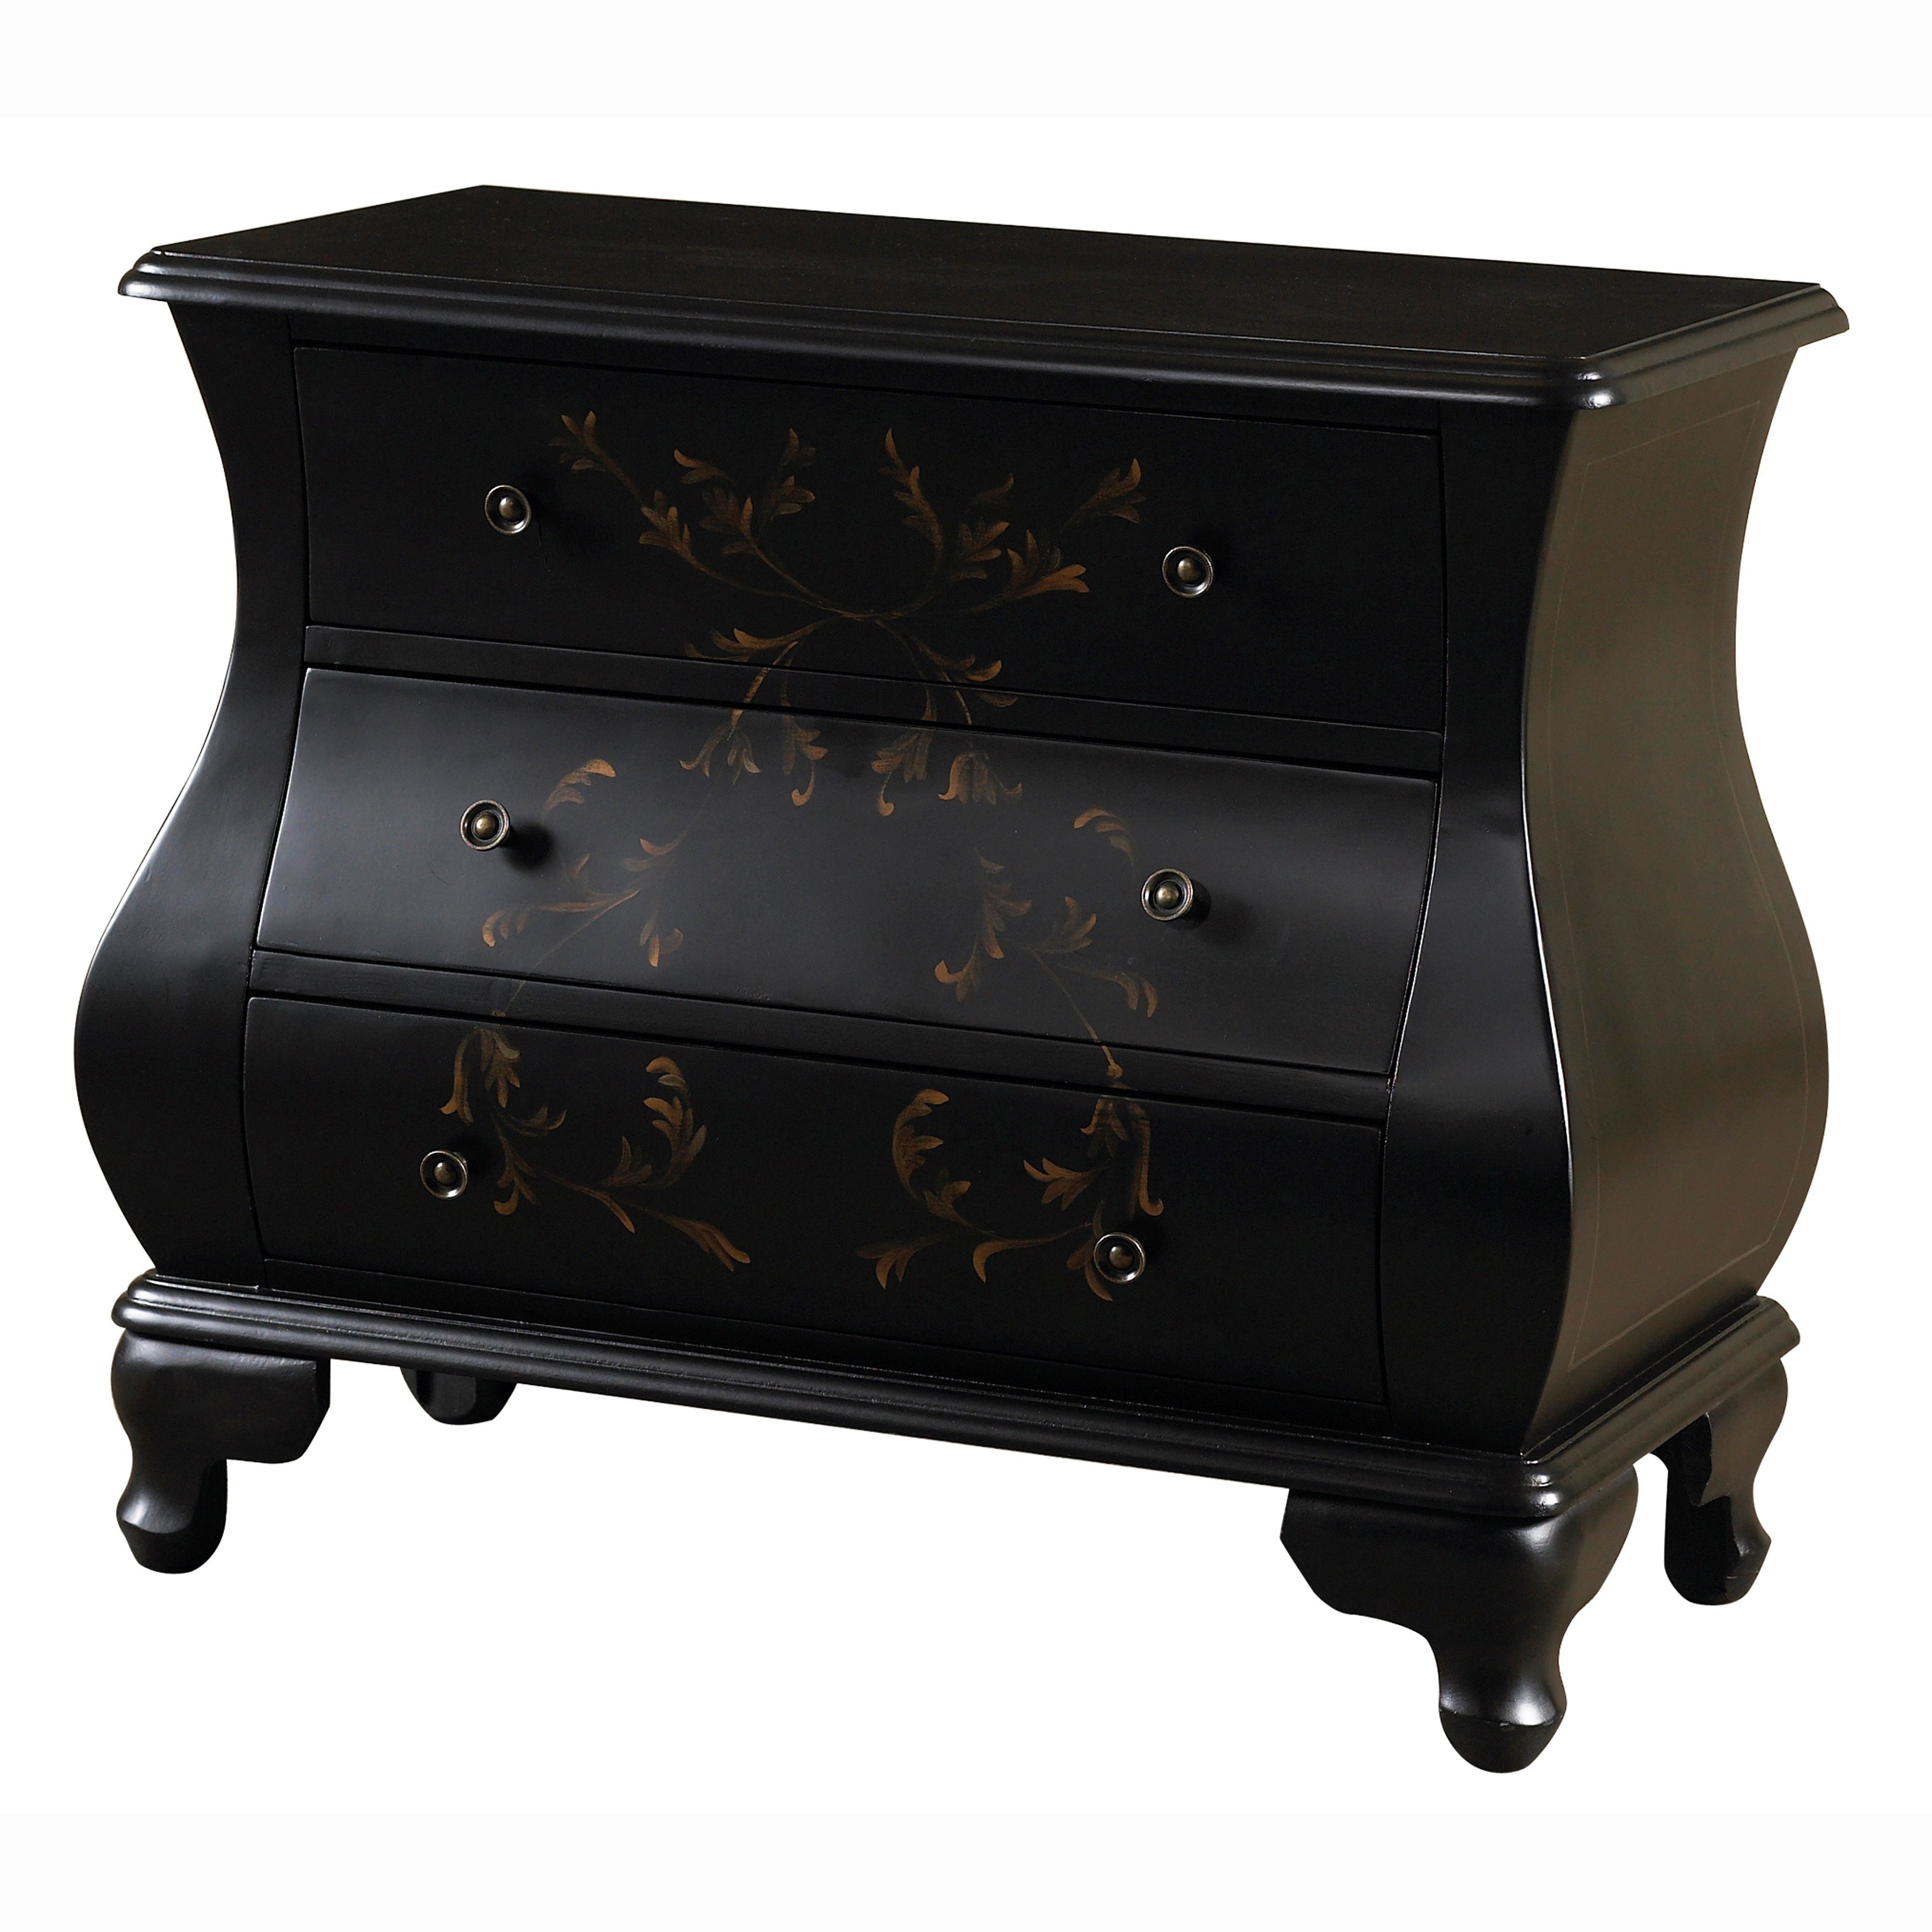 hand painted satin black accent chest free shipping tables and chests today pottery barn cart coffee table sectional couch small side end jcpenney dishes oriental lamps classic